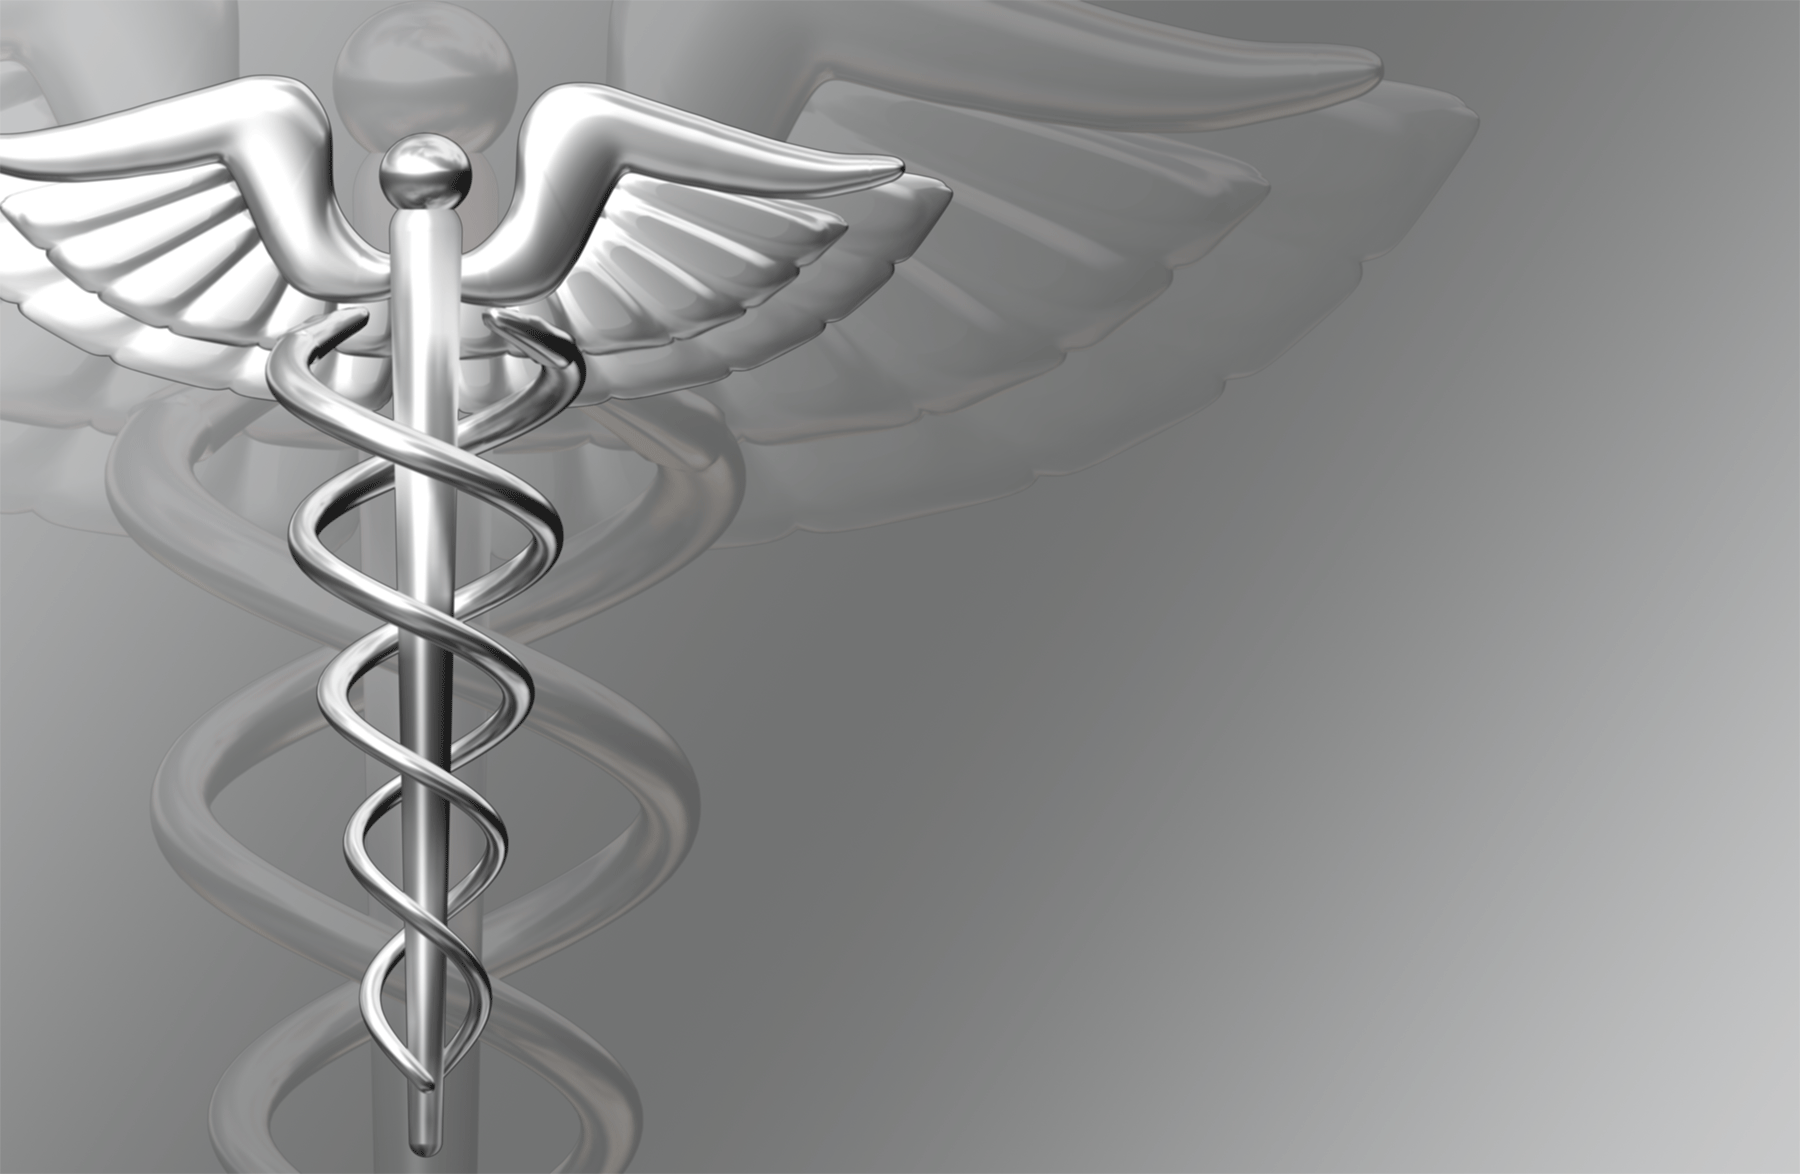 790+ Medical Symbol Stock Videos and Royalty-Free Footage - iStock |  Emergency medical symbol, Caduceus, Medical icons